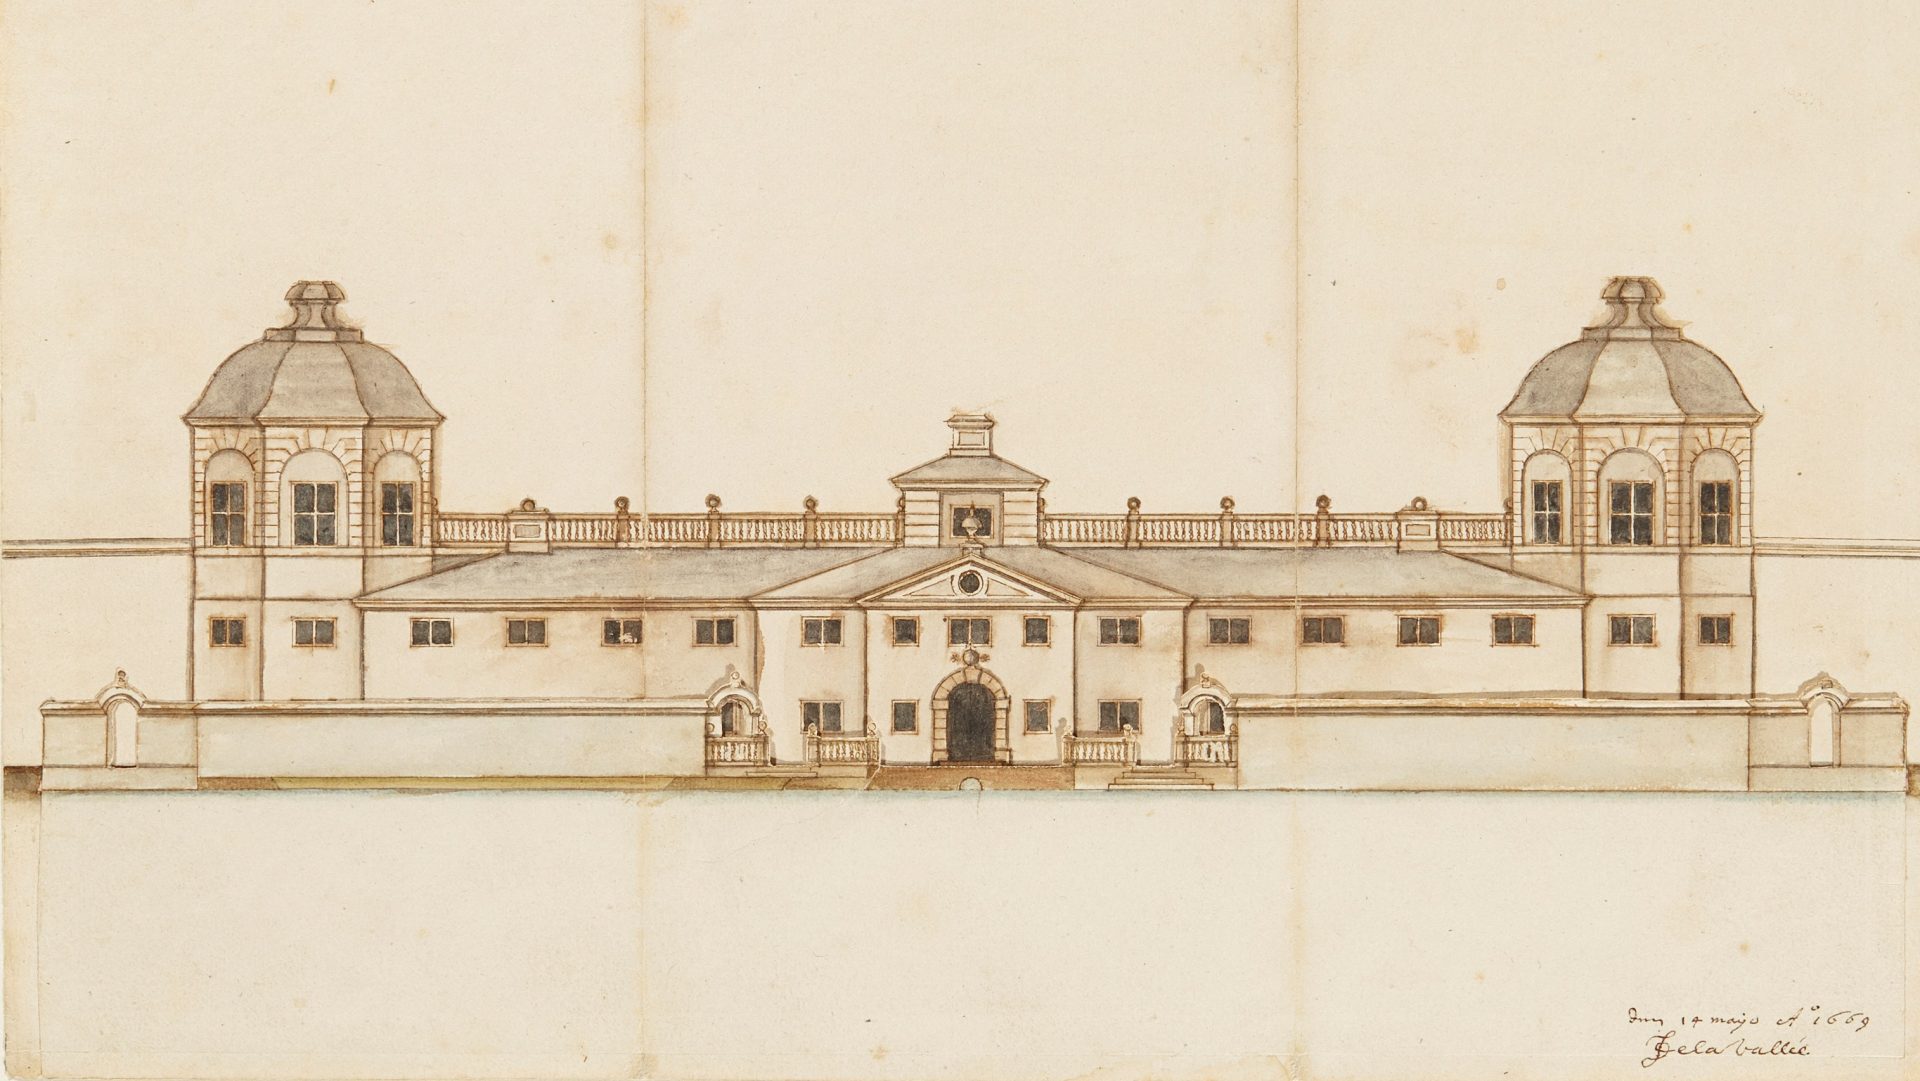 A drawing of a low building with two towers.